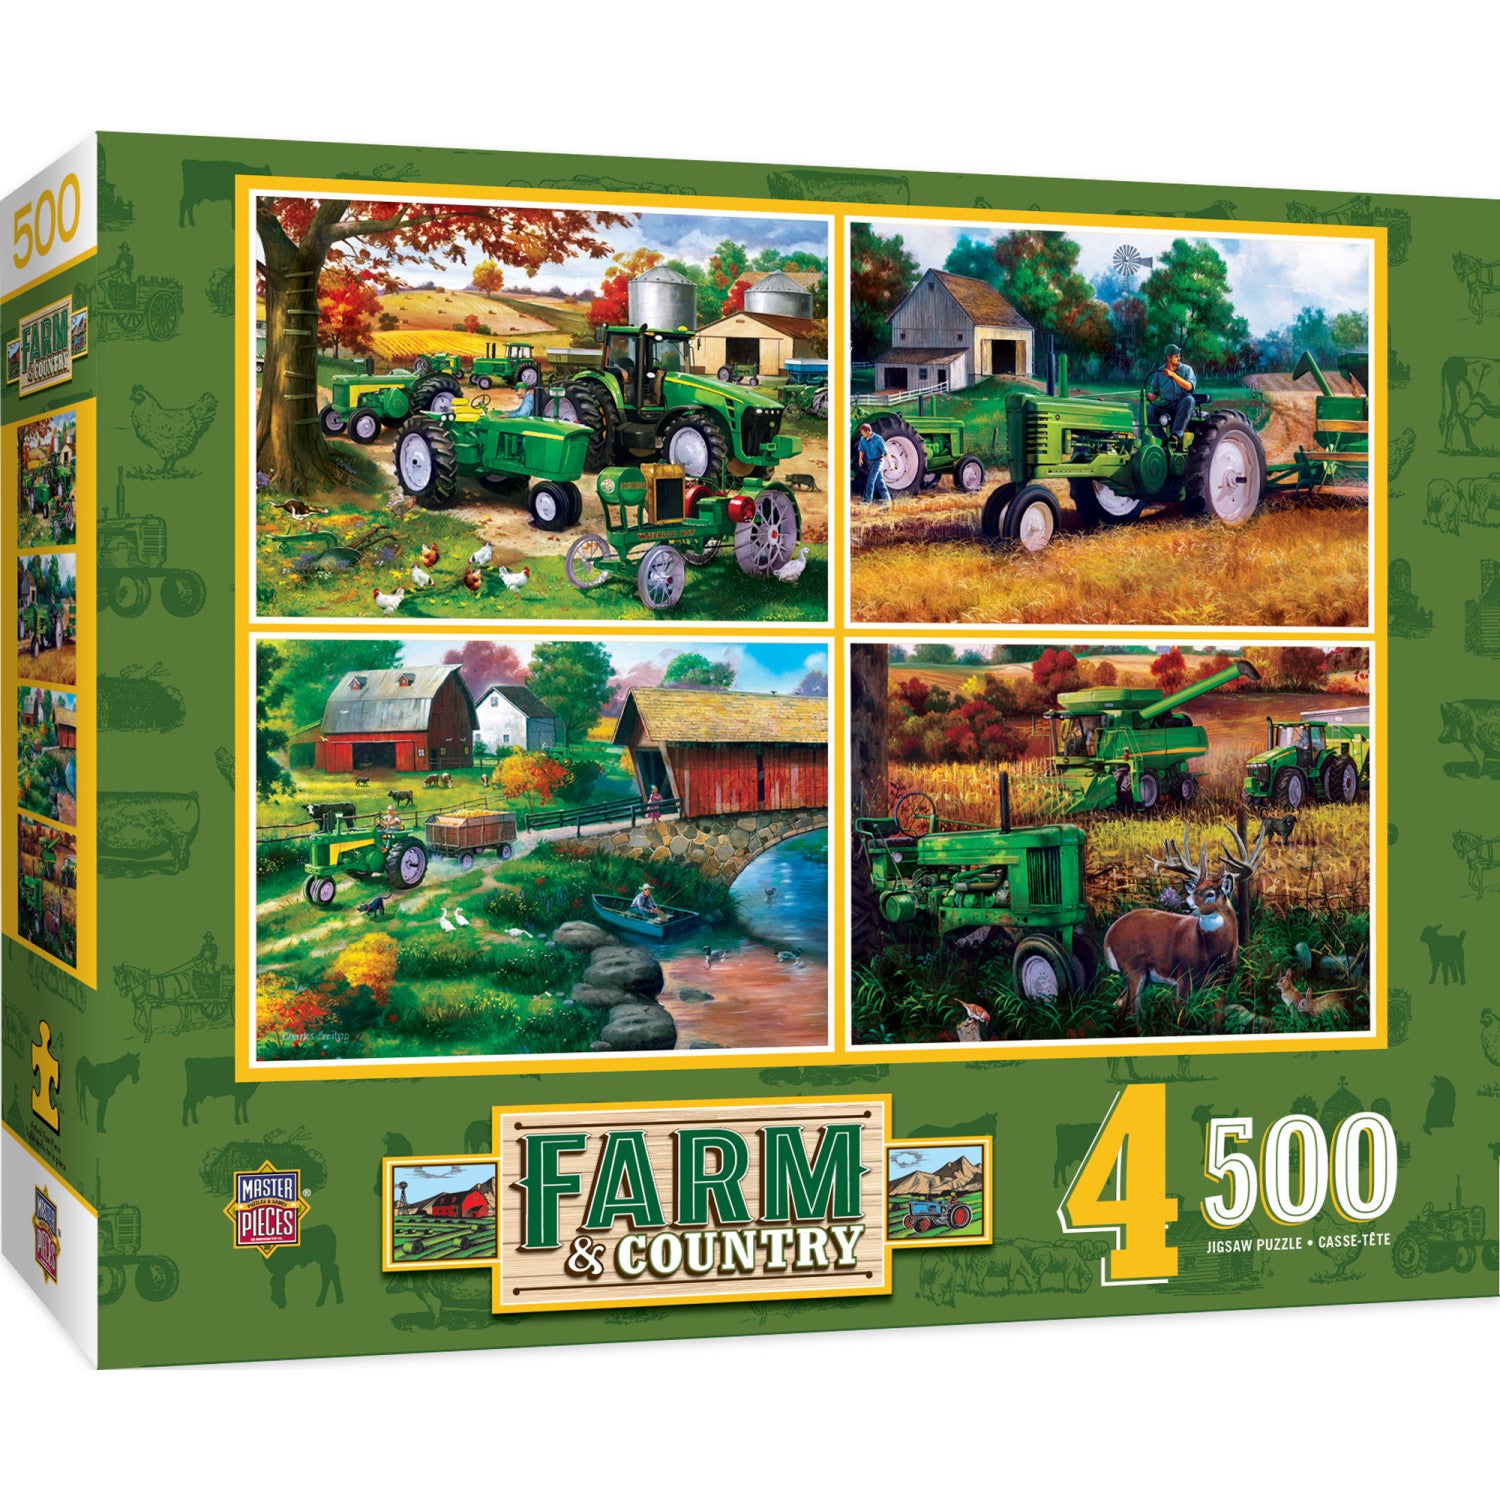 Farm & Country - 500 Piece Jigsaw Puzzles 4 Pack